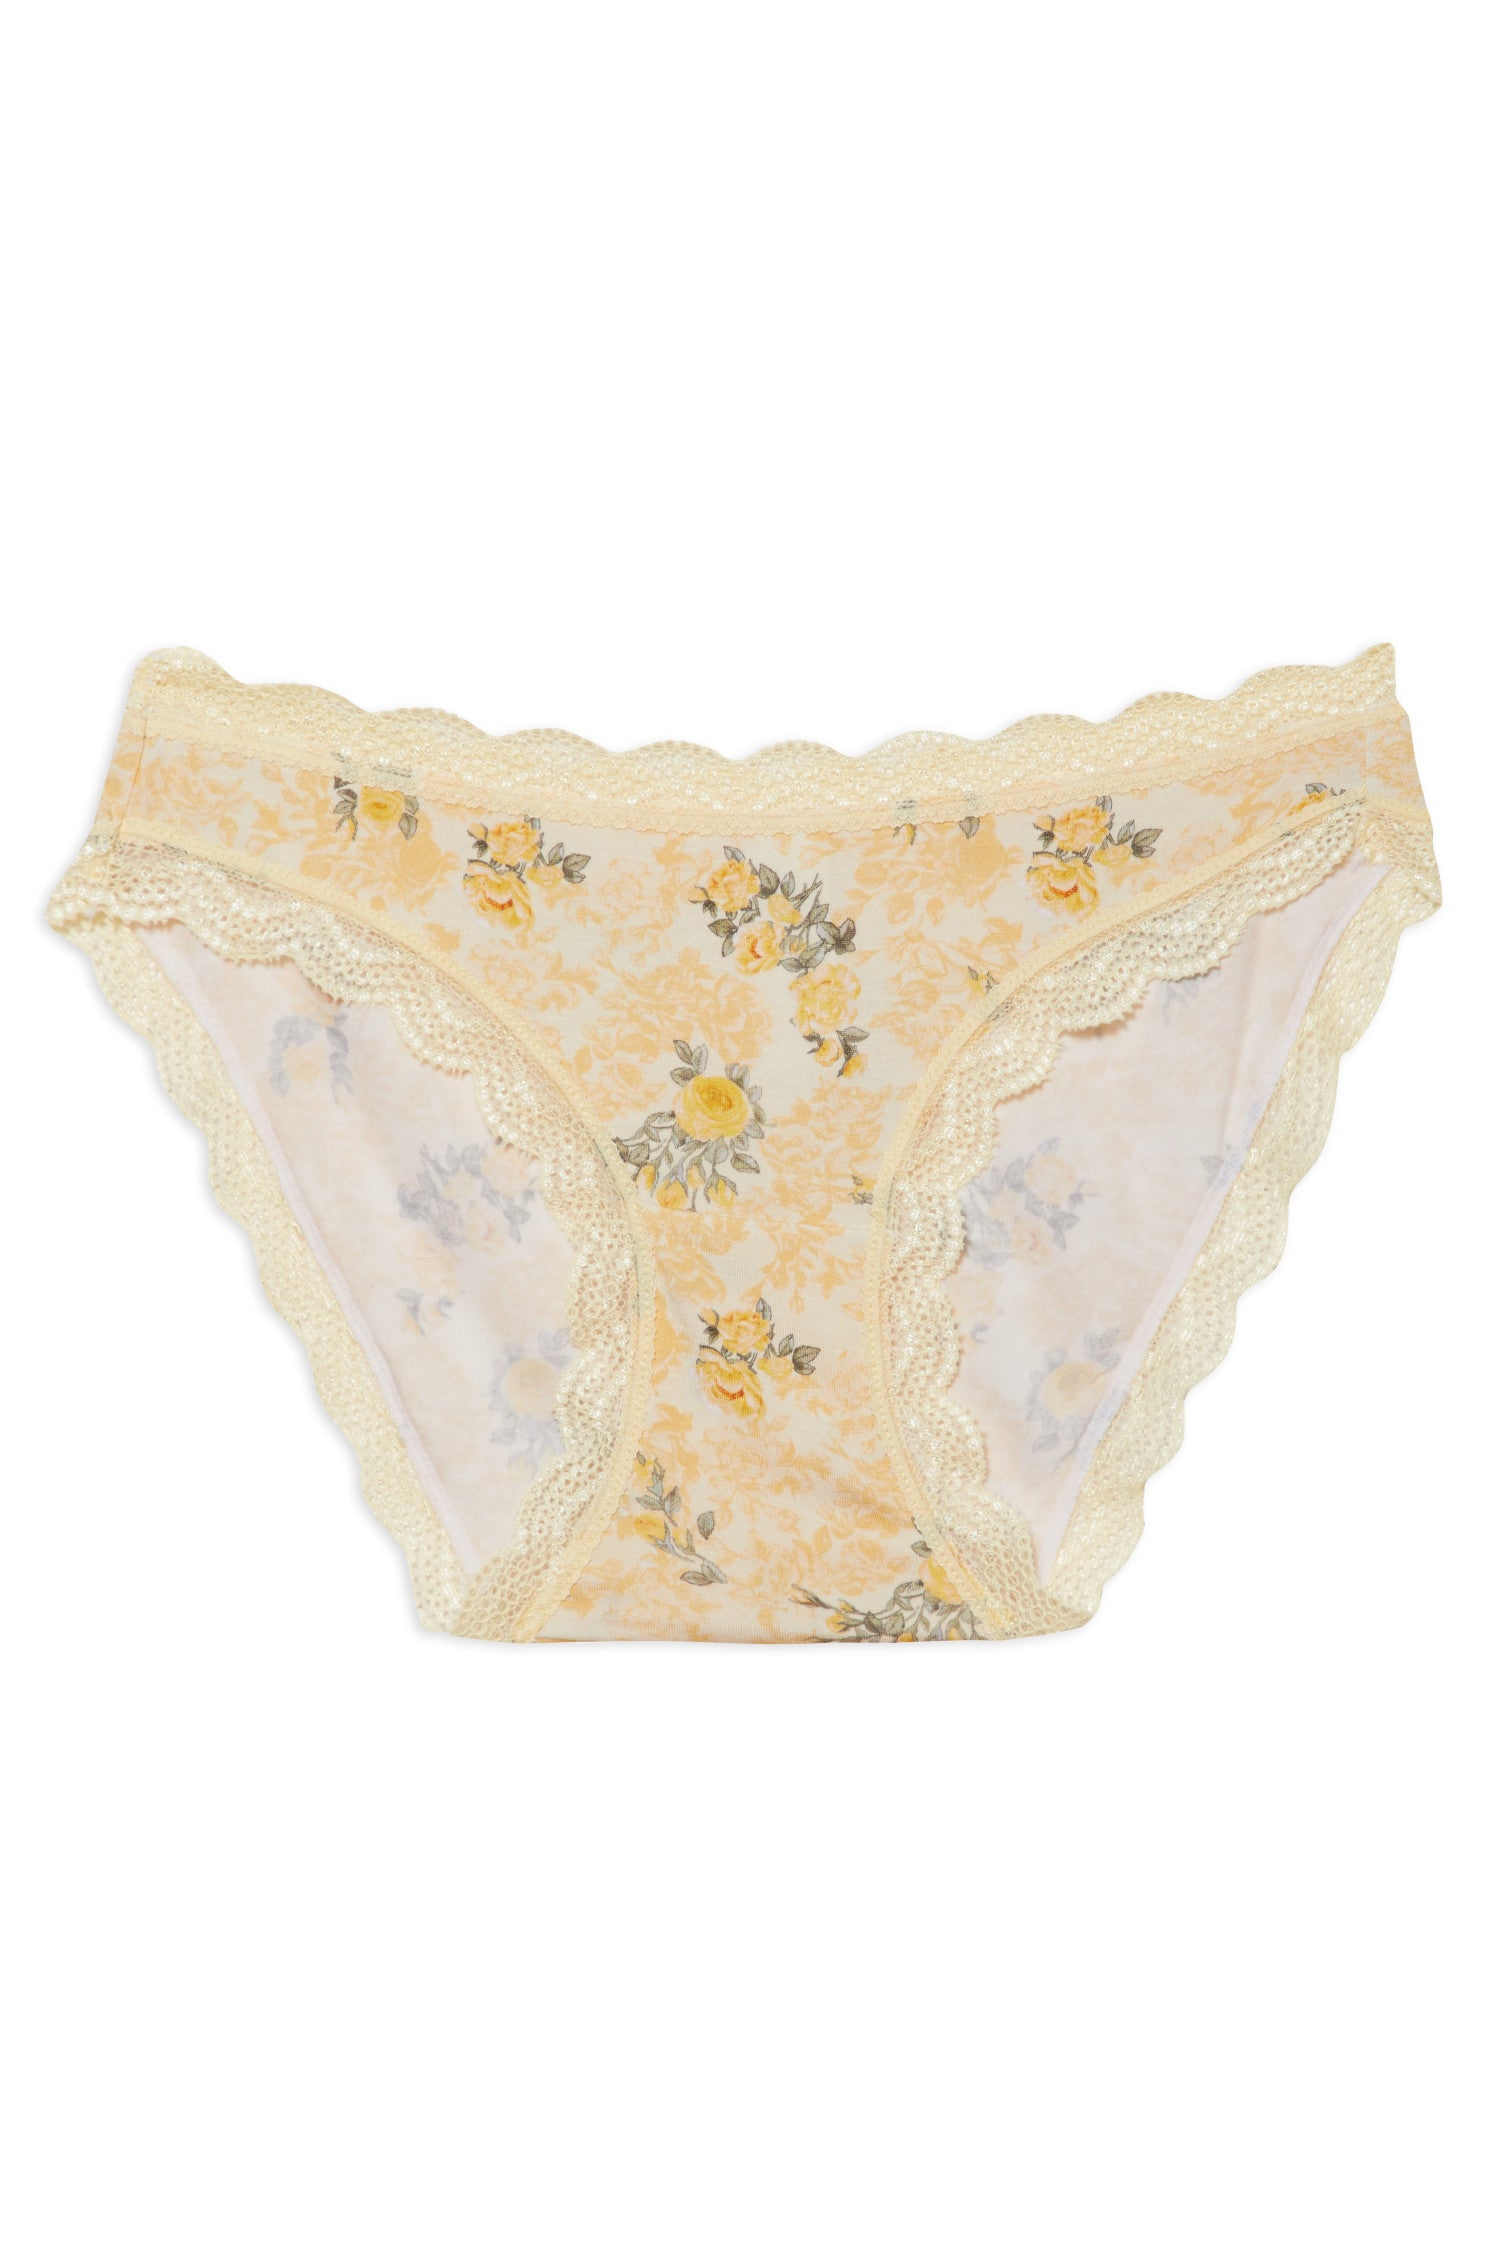 Floral rose print underwear set in soft cotton with lace trim